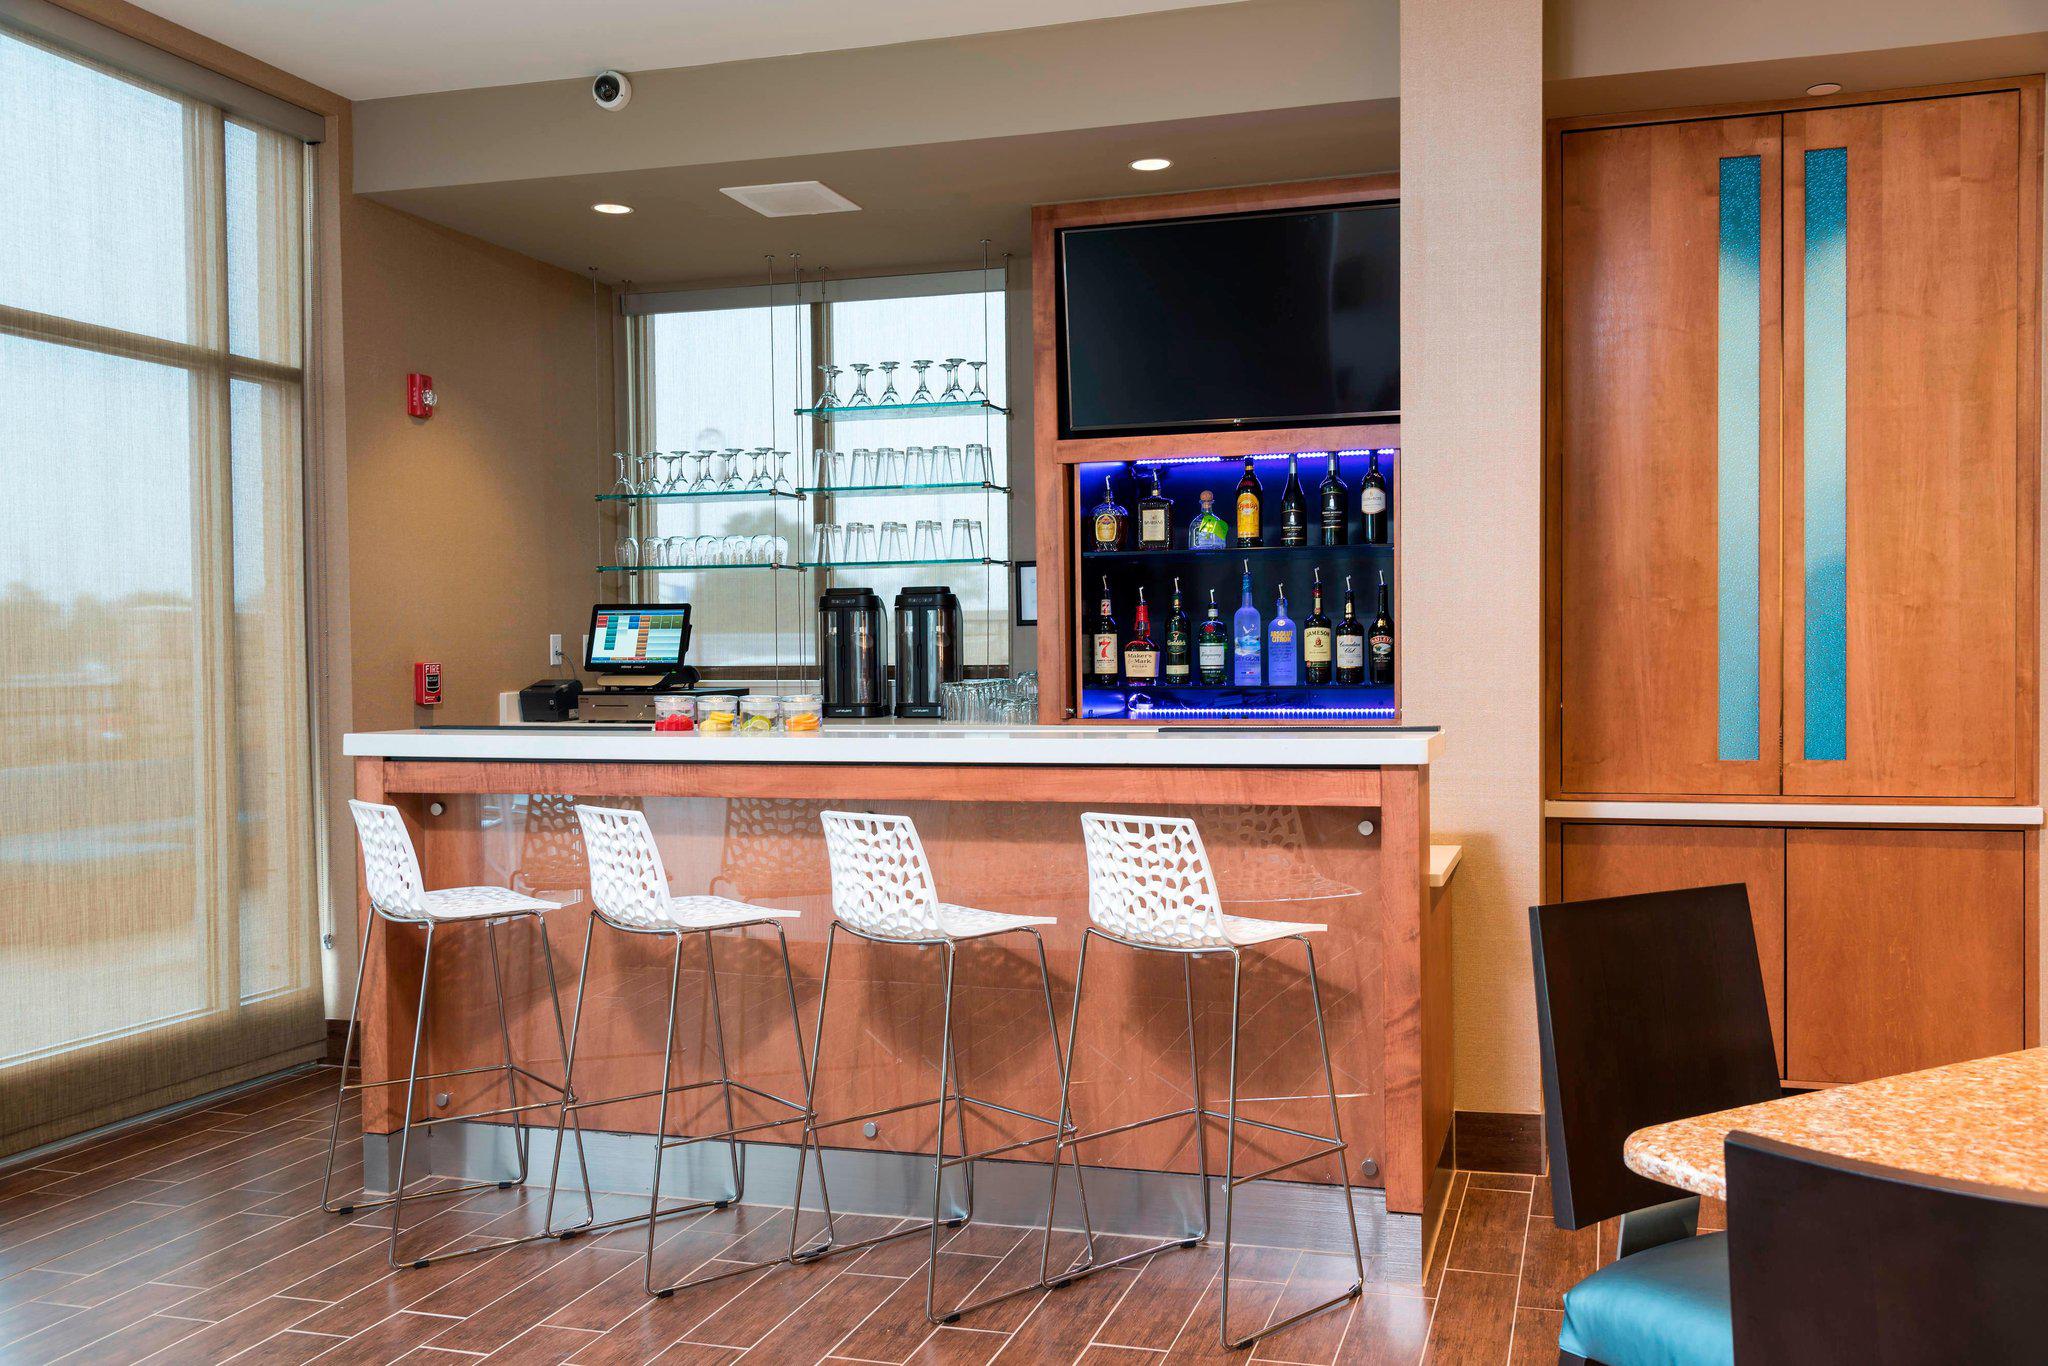 SpringHill Suites by Marriott Chicago Southeast/Munster, IN Photo